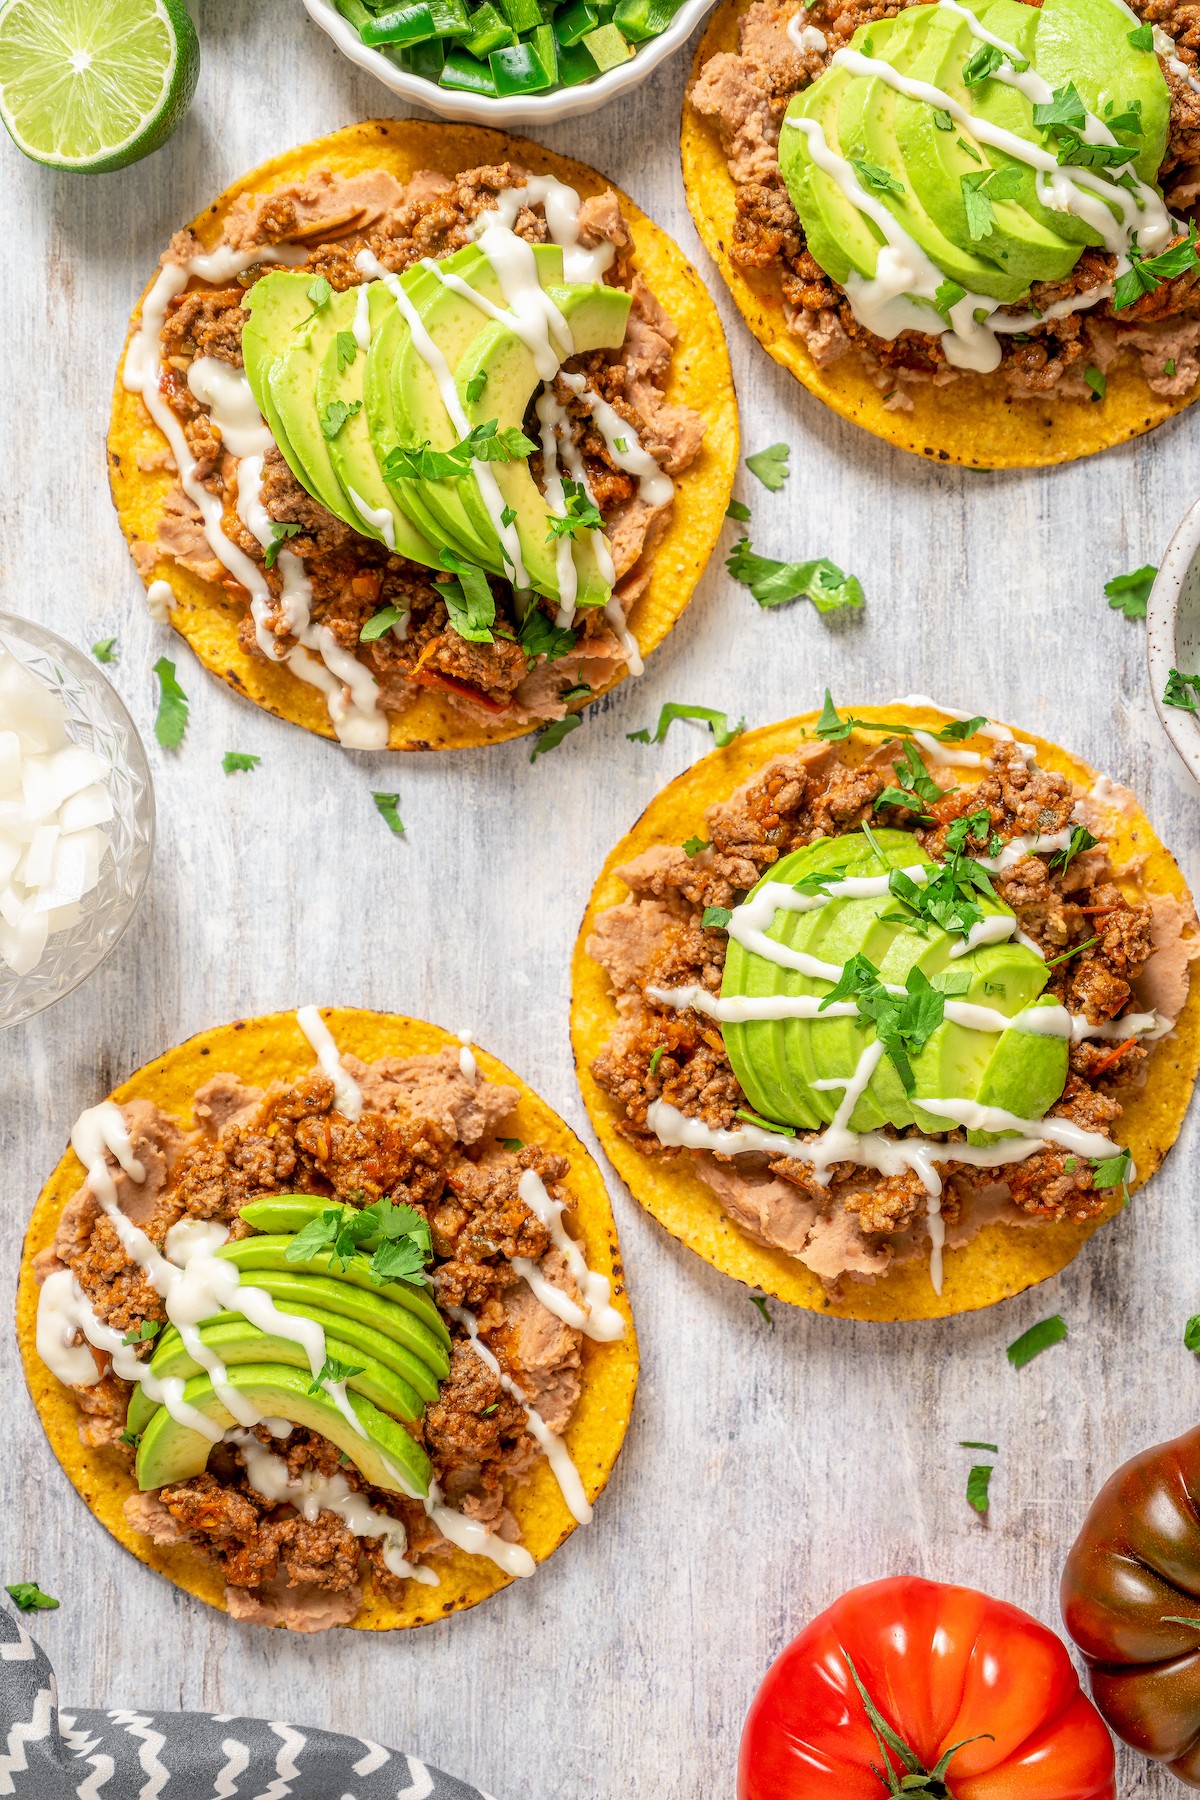 Carne molida tostadas with toppings.